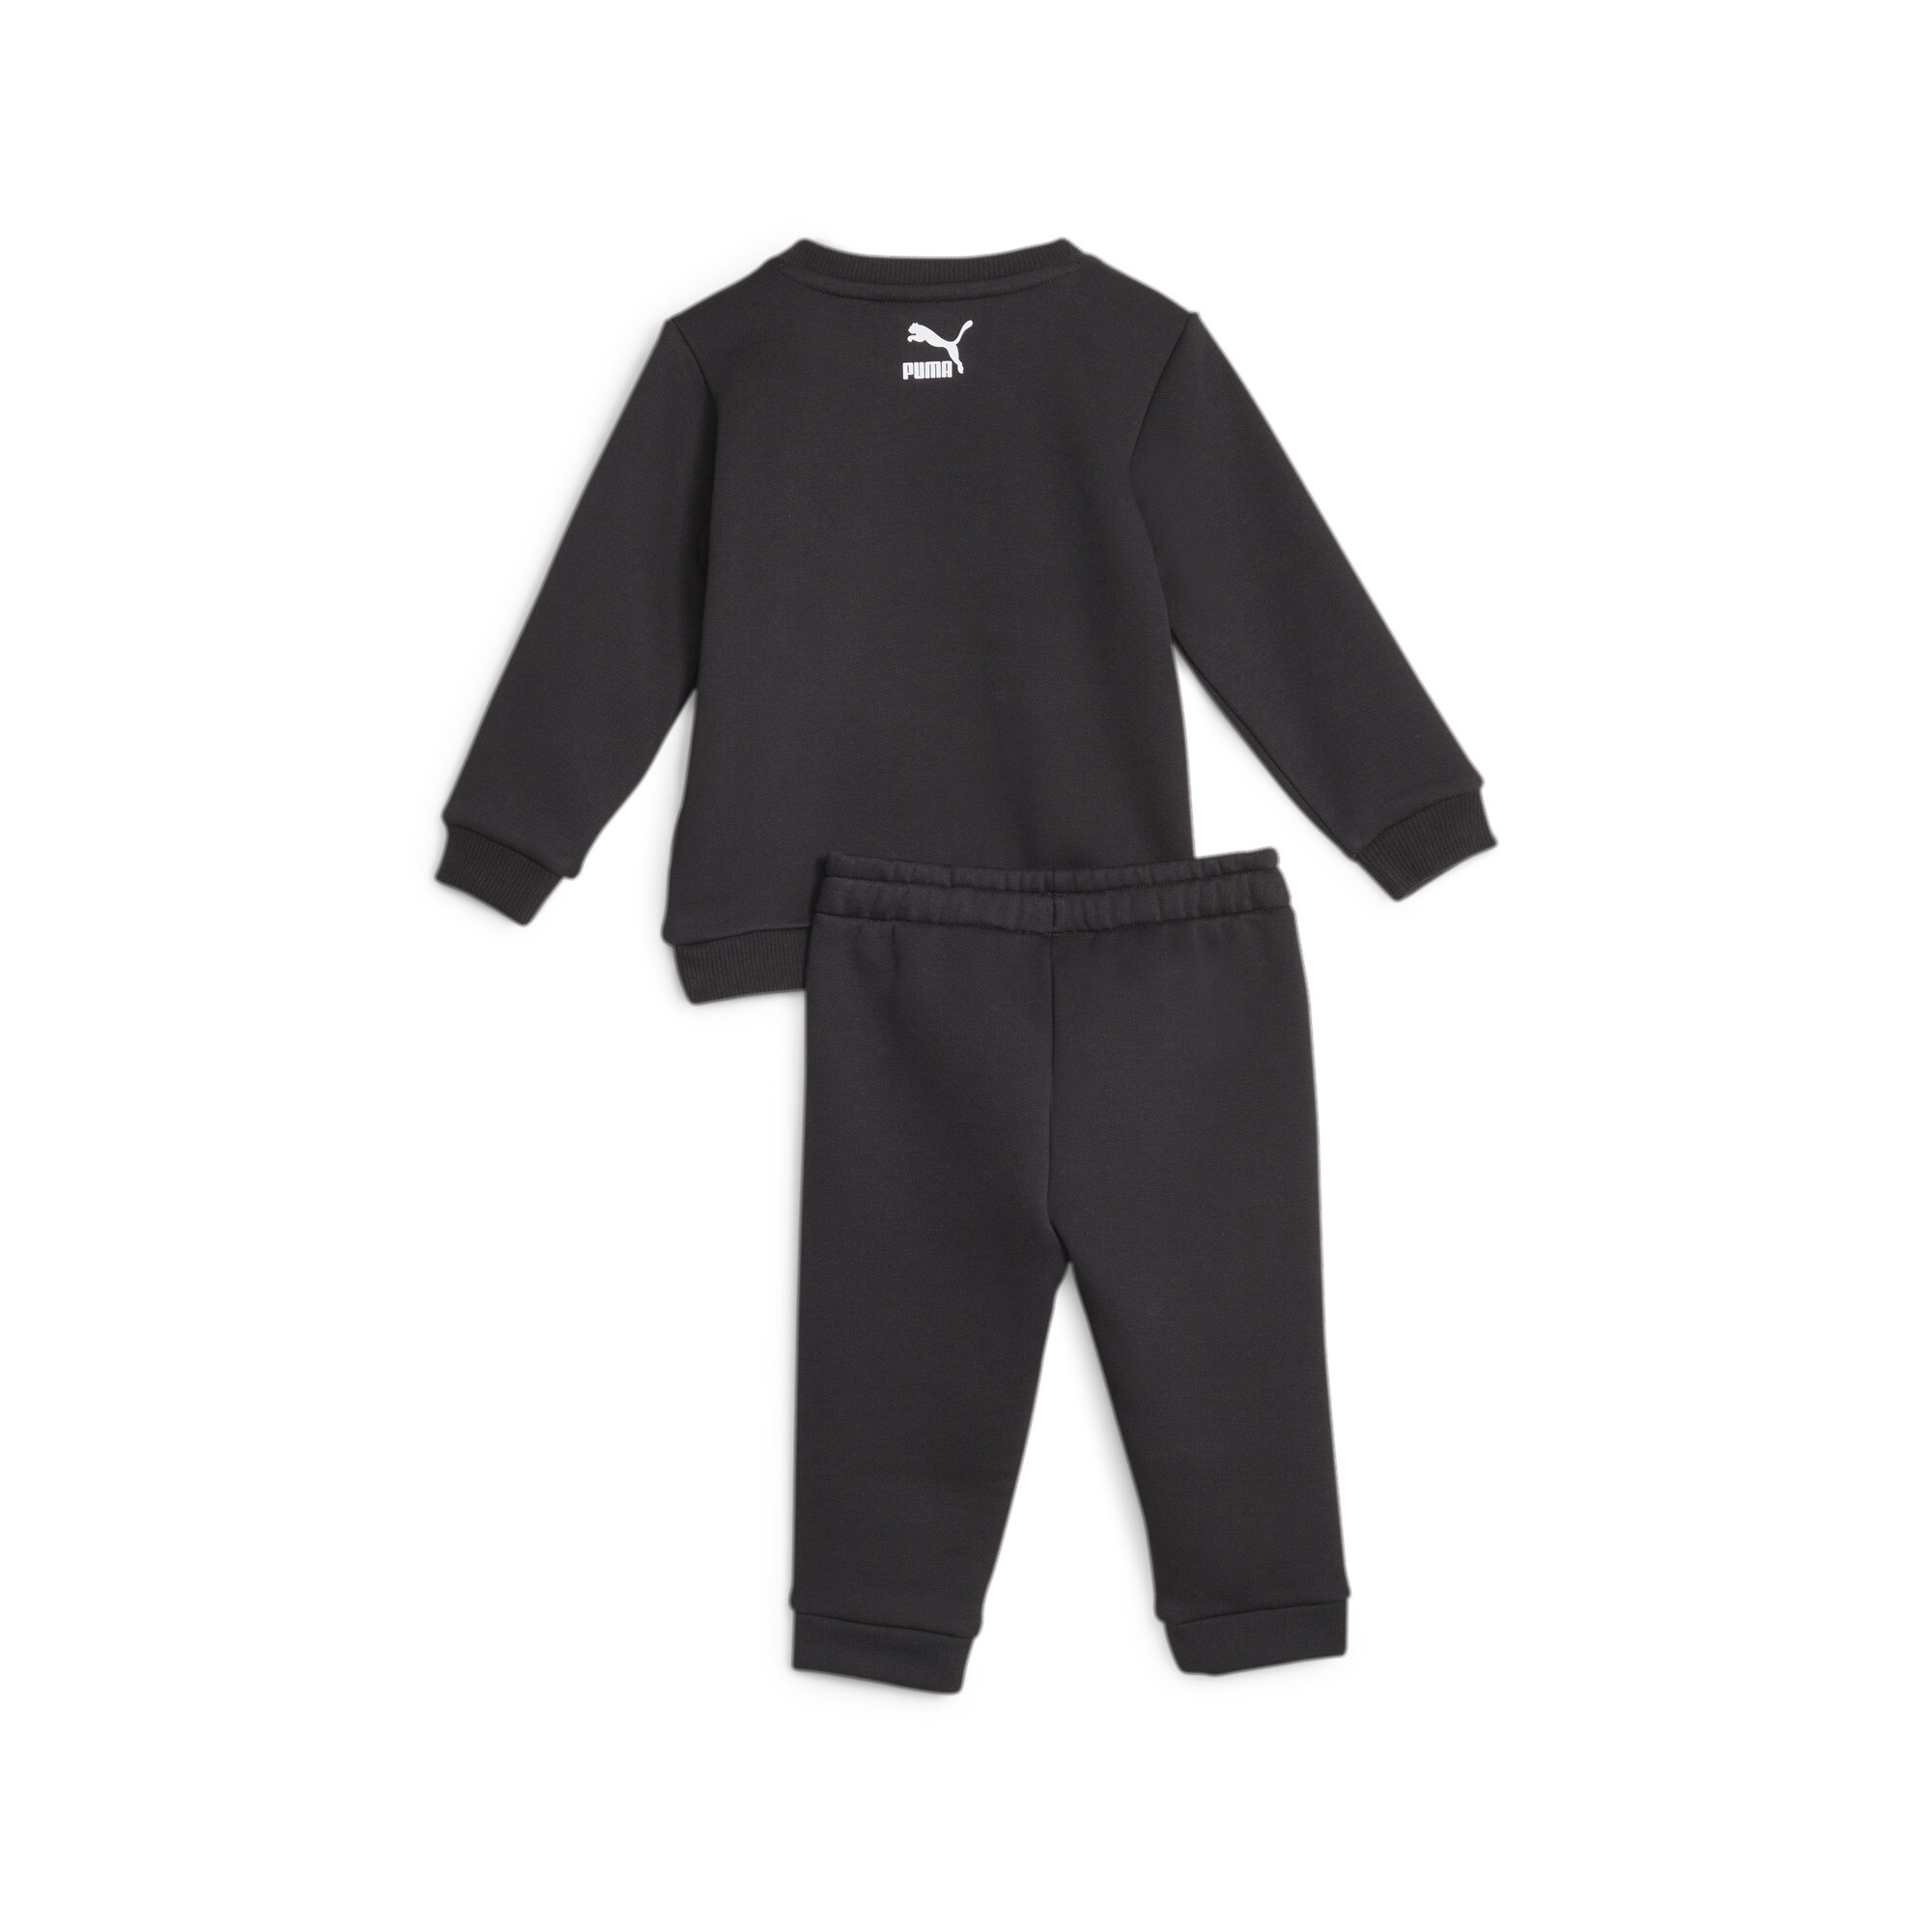 Kids' PUMA X MIRACULOUS Toddlers' Jogger In Black, Size 9-12 Months